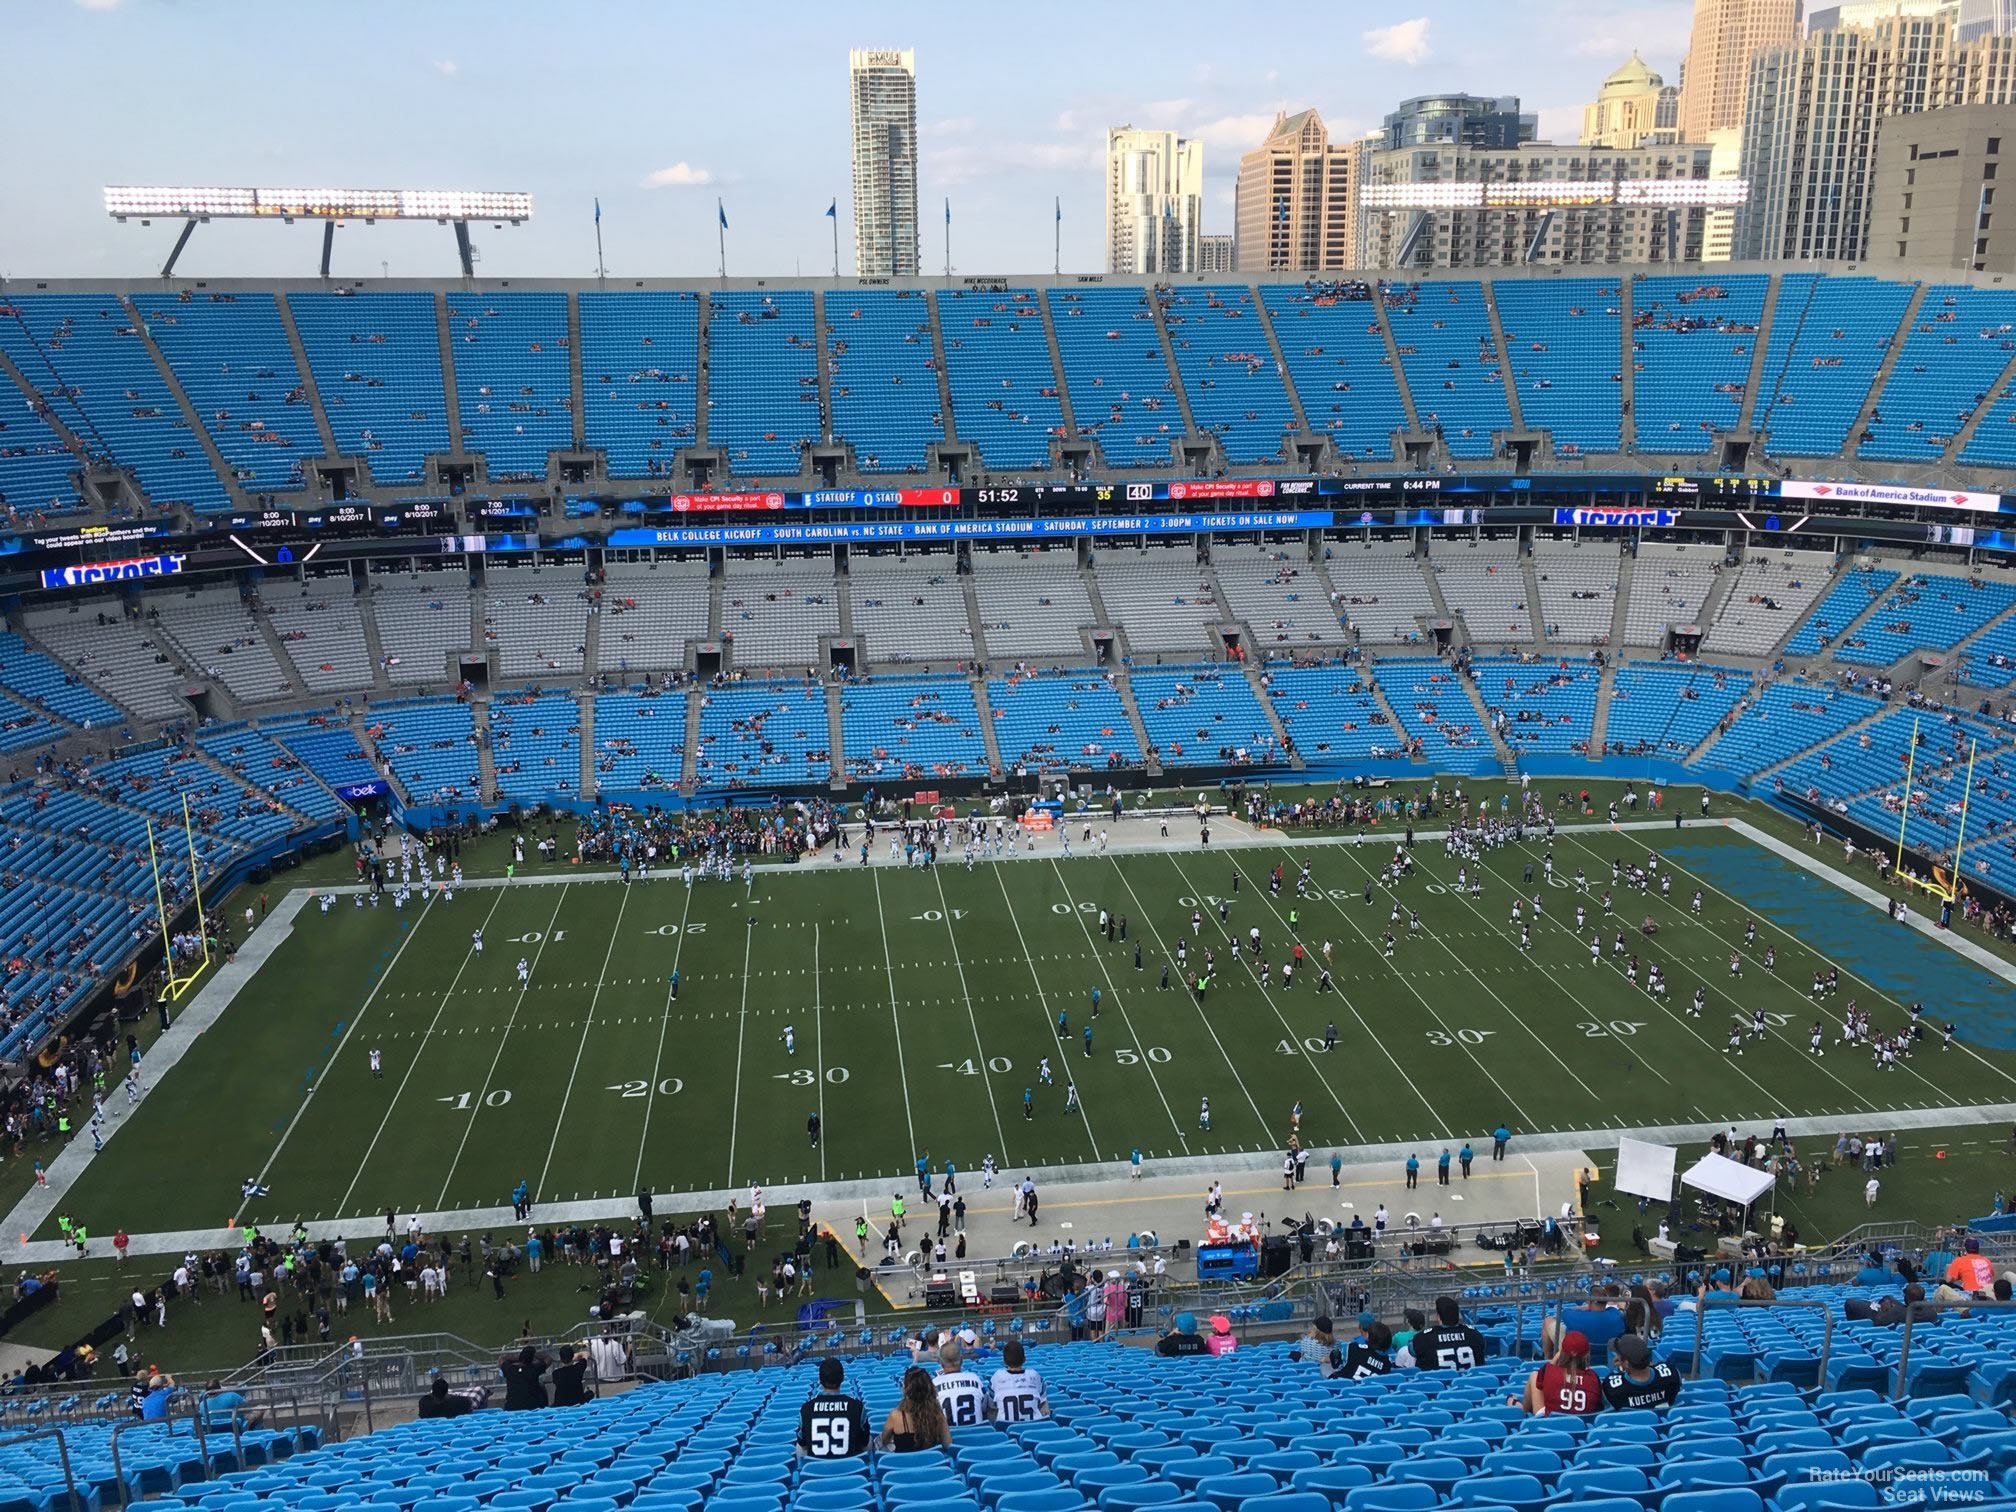 section 543, row 29 seat view  for football - bank of america stadium